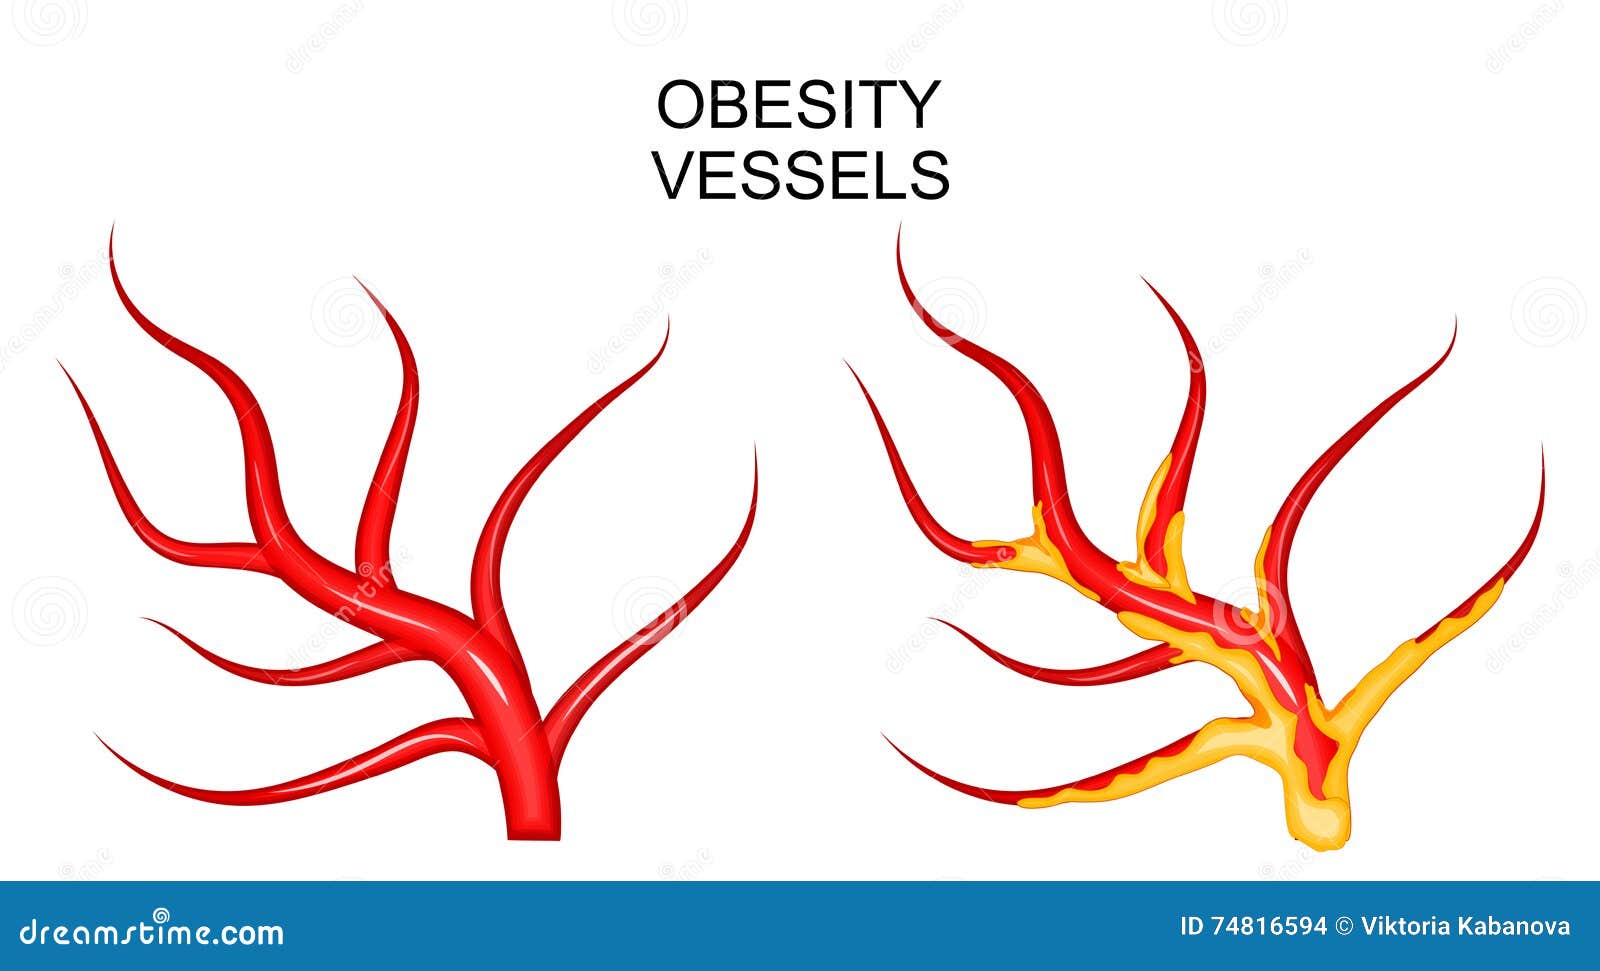 clipart of blood vessels - photo #33